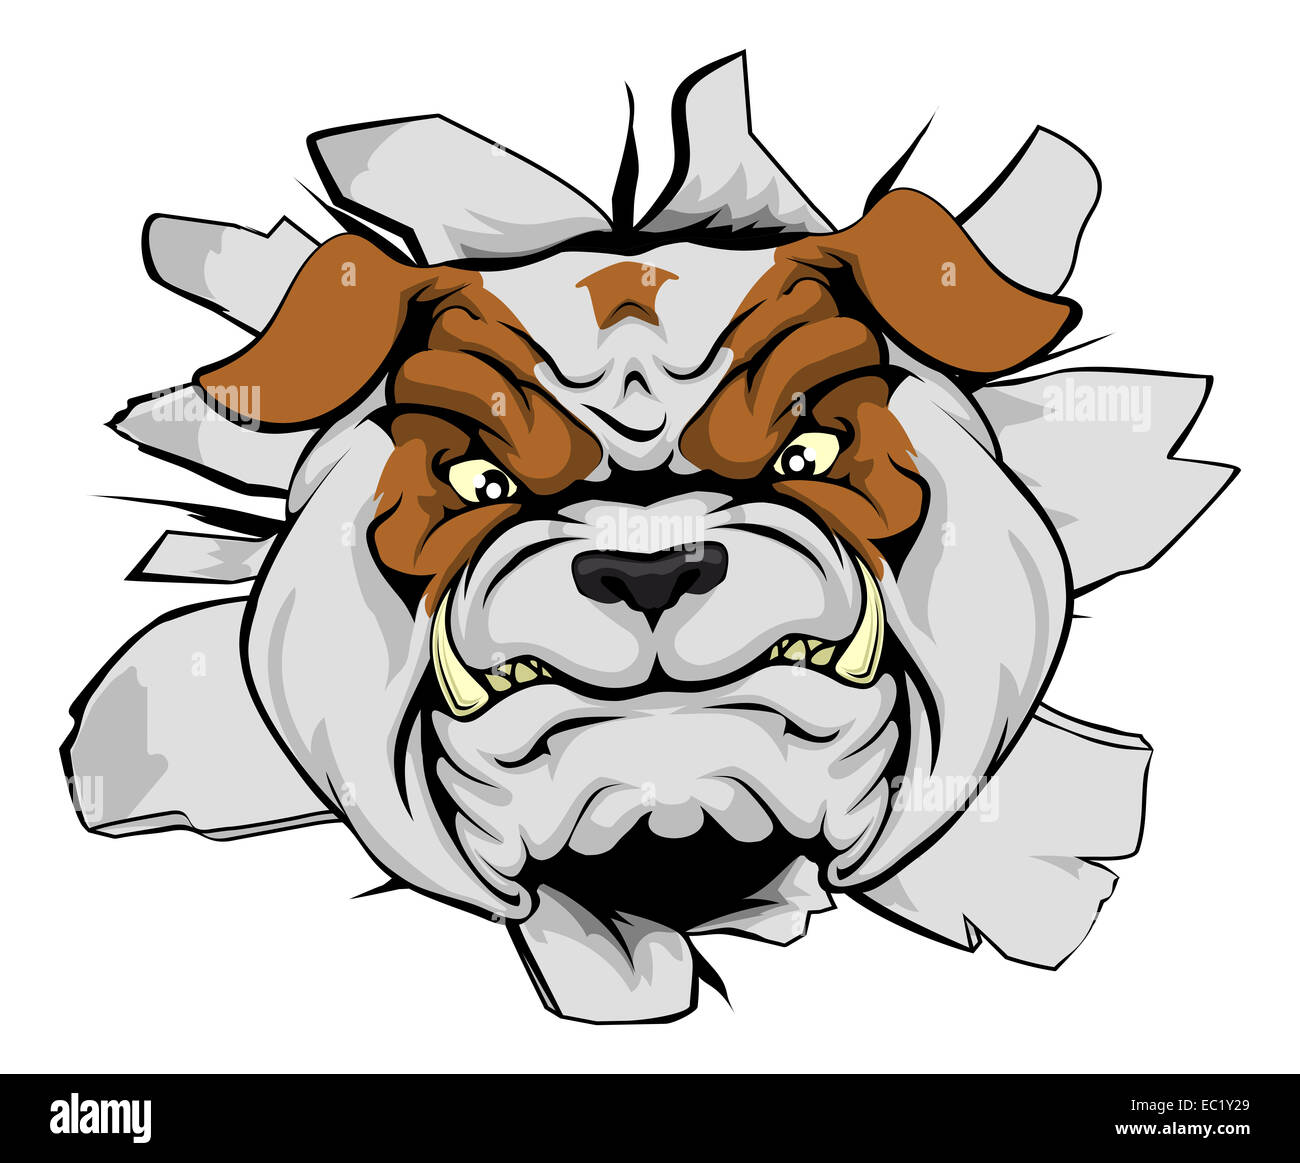 Bulldog mascot breakthrough concept of a bull sports mascot or animal character ripping through a wall Stock Photo